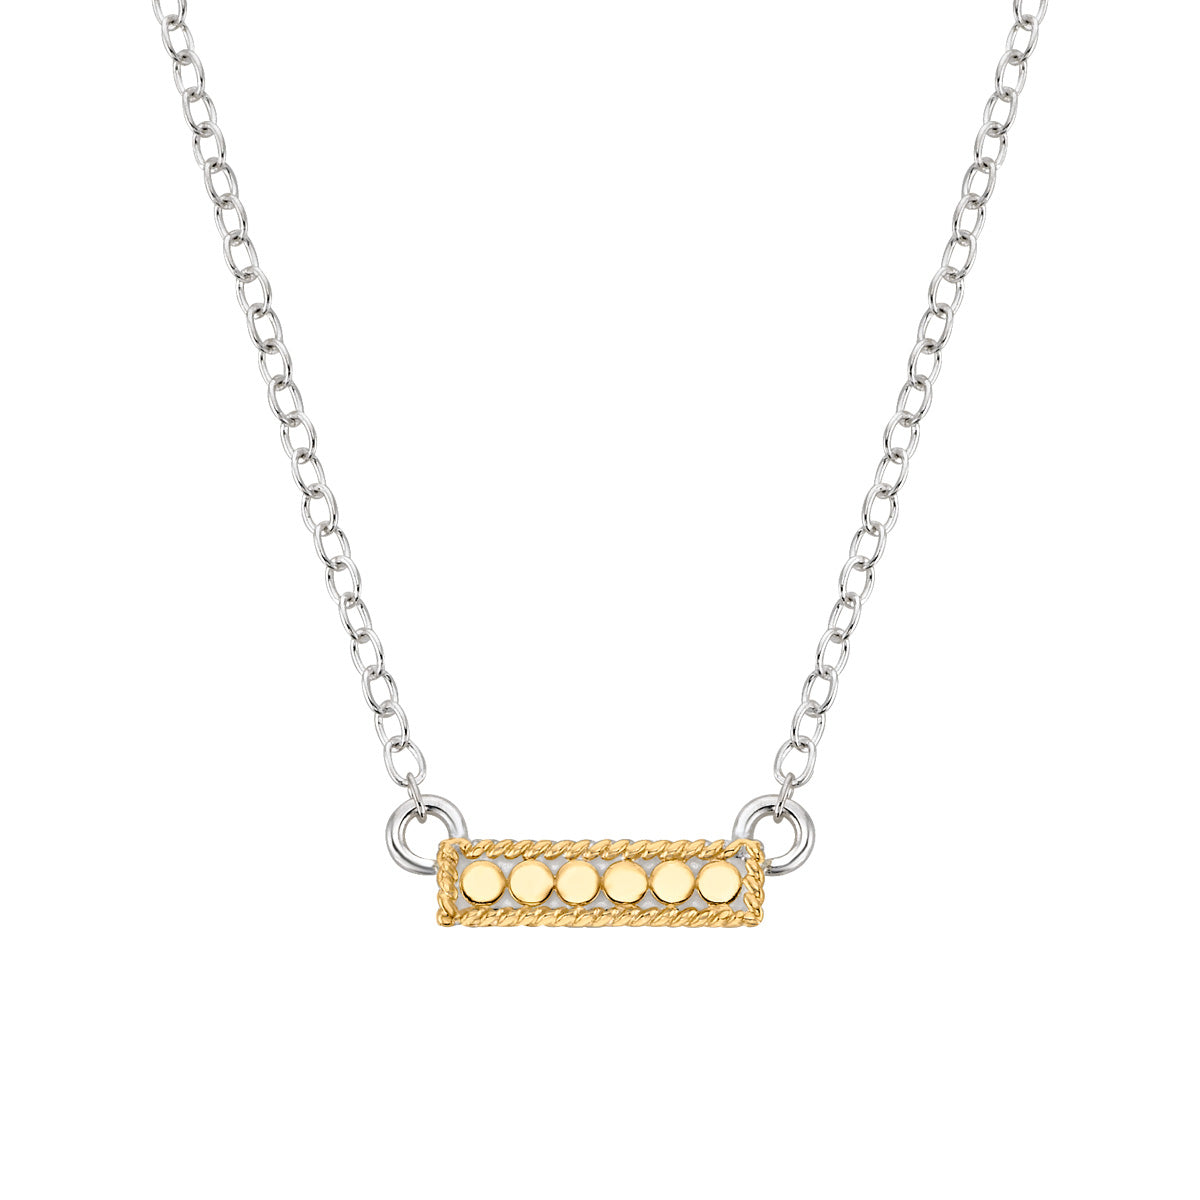 Ana Beck 18k gold plated and sterling silver Mini Reversible Bar Necklace